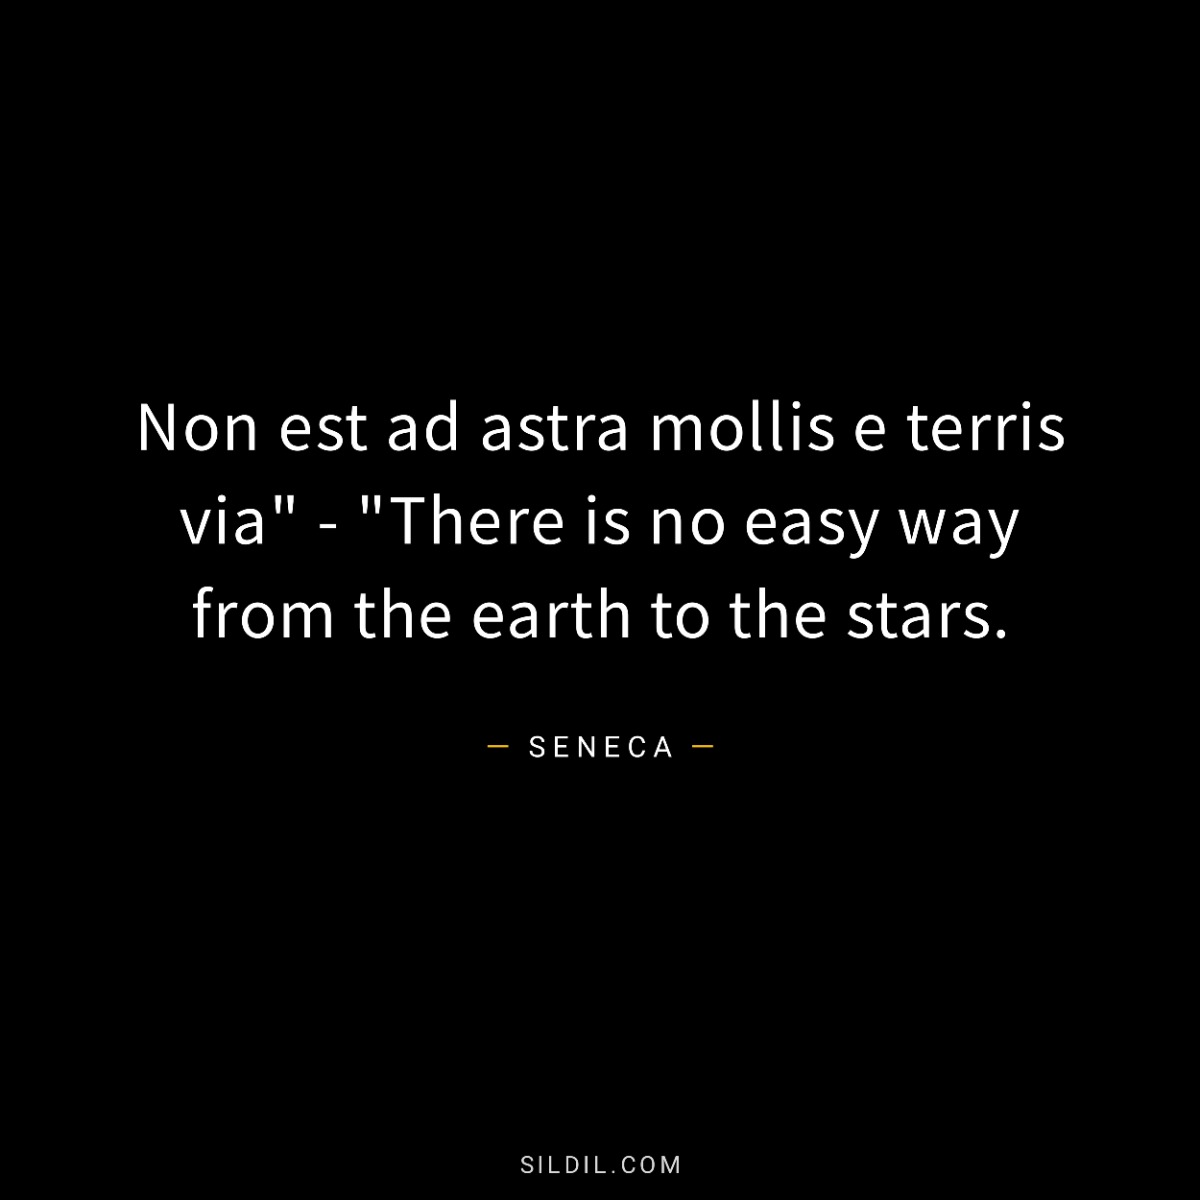 Non est ad astra mollis e terris via" - "There is no easy way from the earth to the stars.